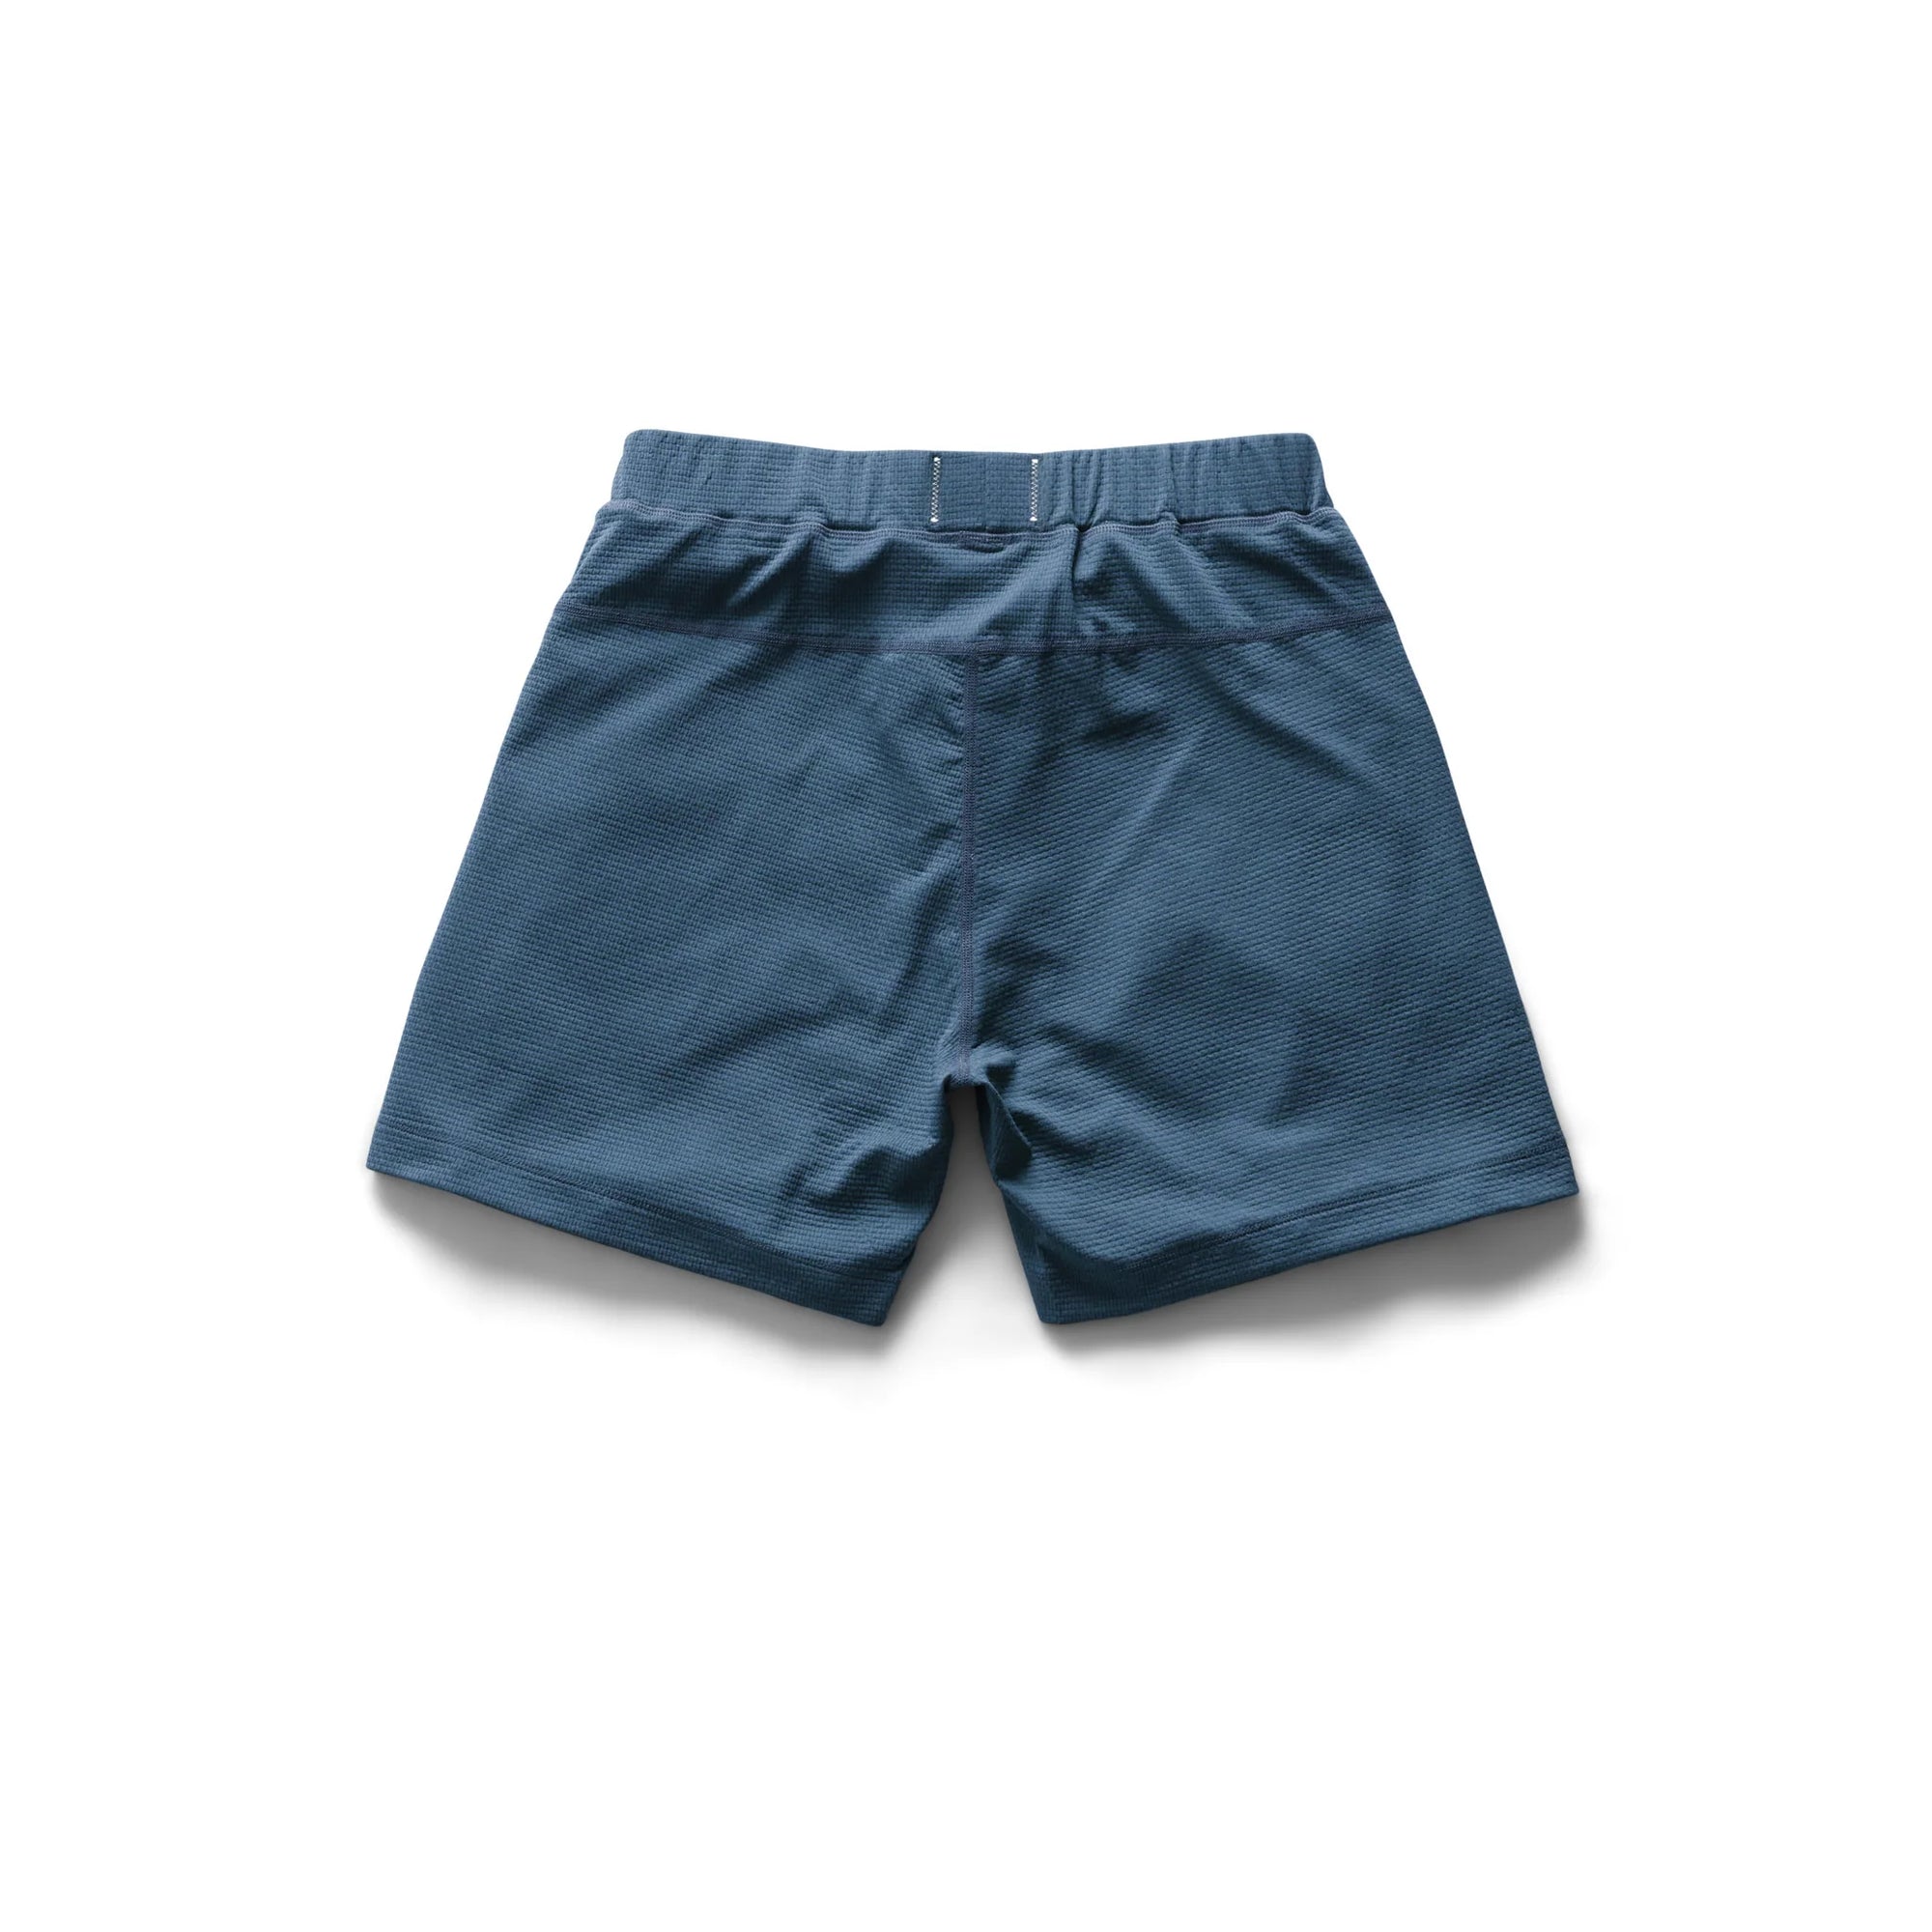 Reigning Champ Solotex Mesh Short in Washed Blue